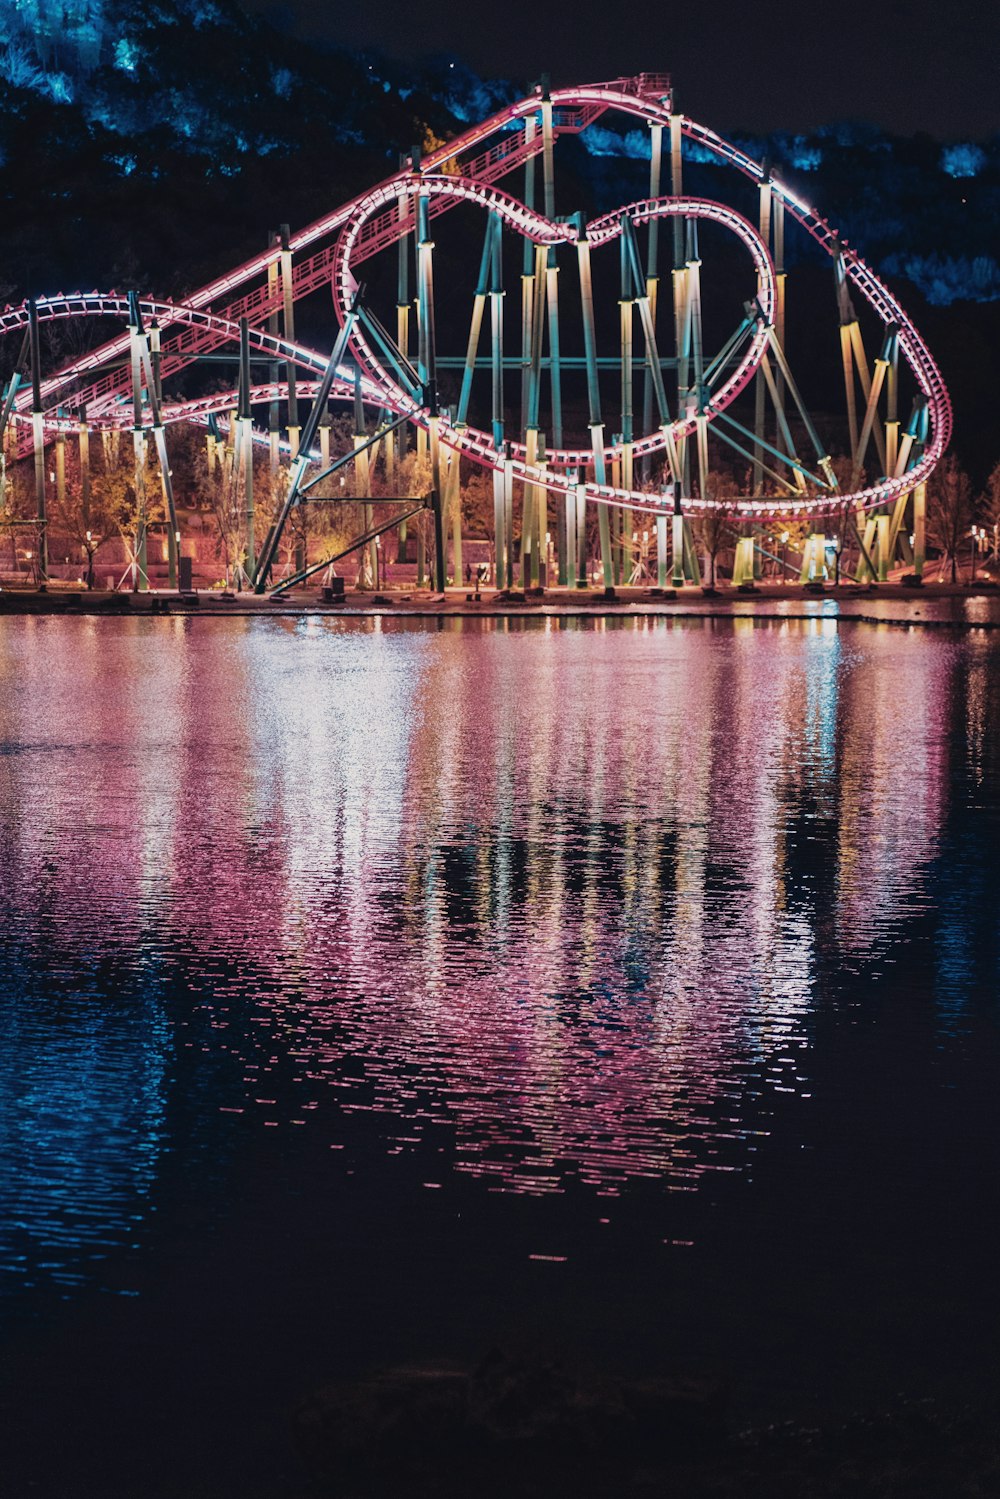 a roller coaster is lit up at night